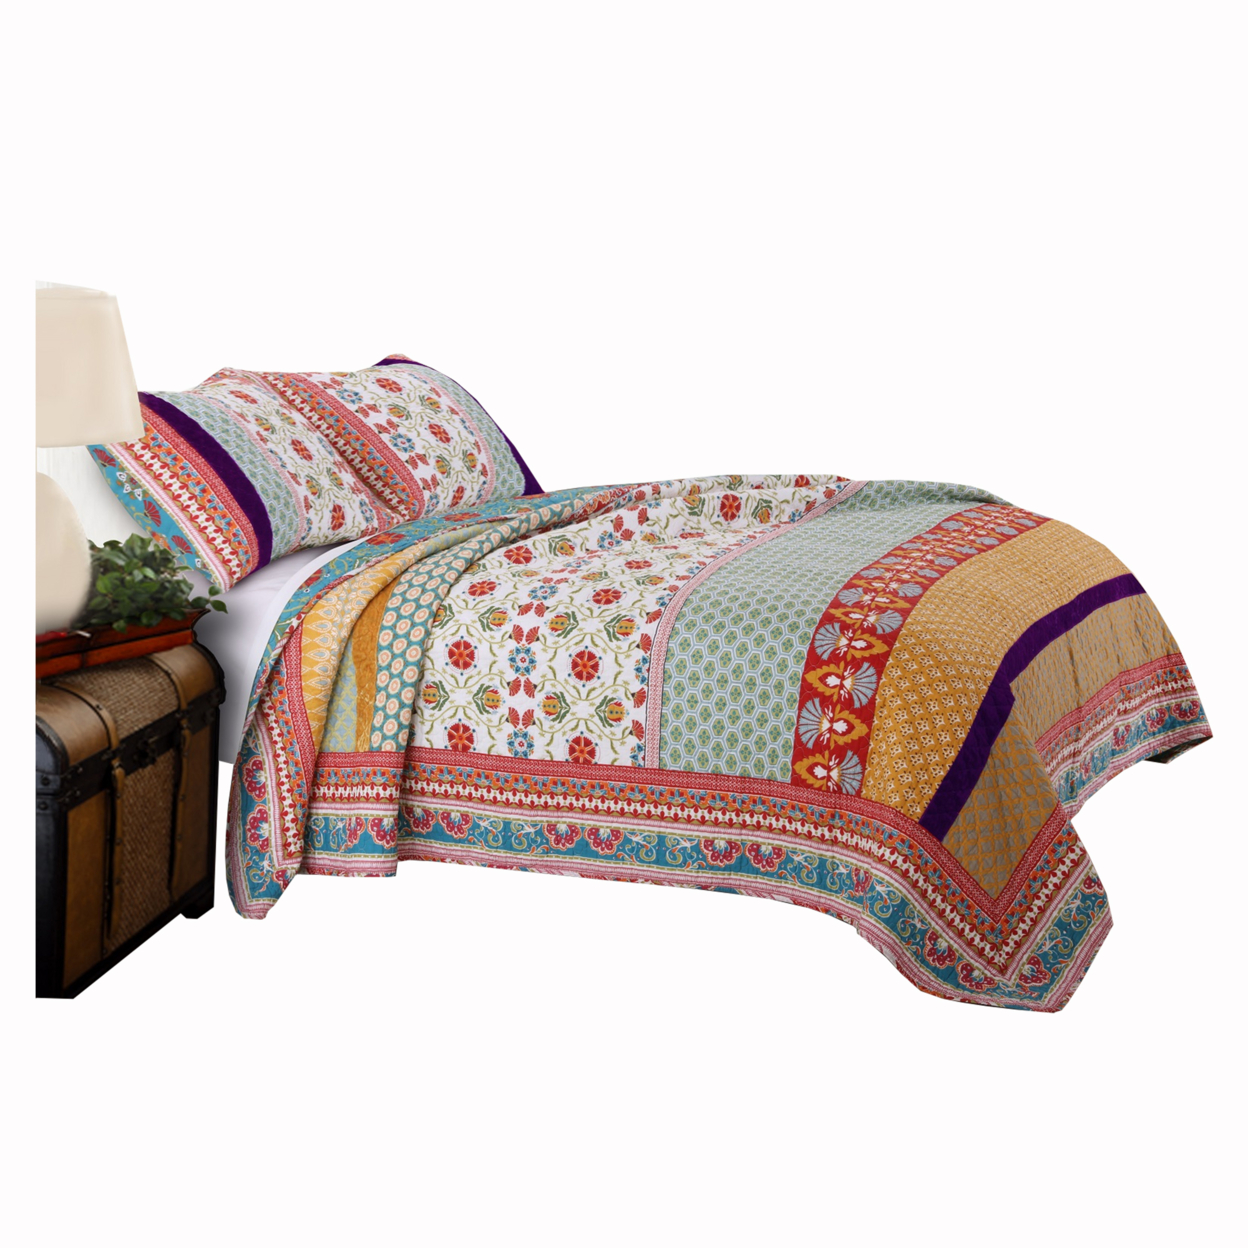 Geometric And Floral Print King Size Quilt Set With 2 Shams, Multicolor- Saltoro Sherpi